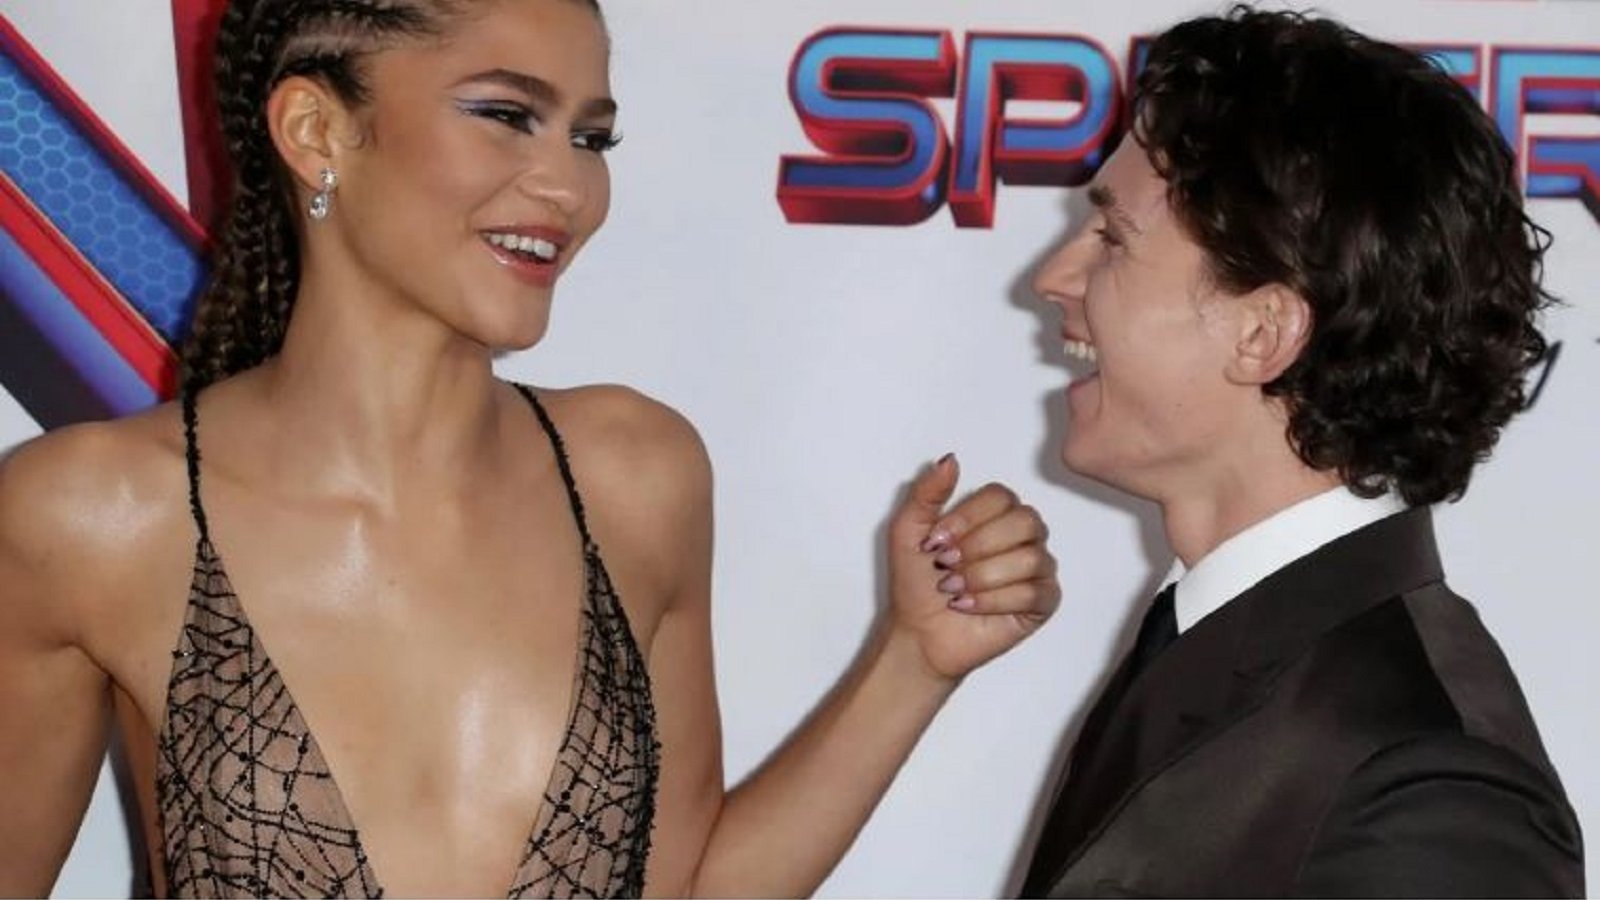 Zendaya and Tom Holland more and more in love between rings and dresses with their respective initials engraved and sewn